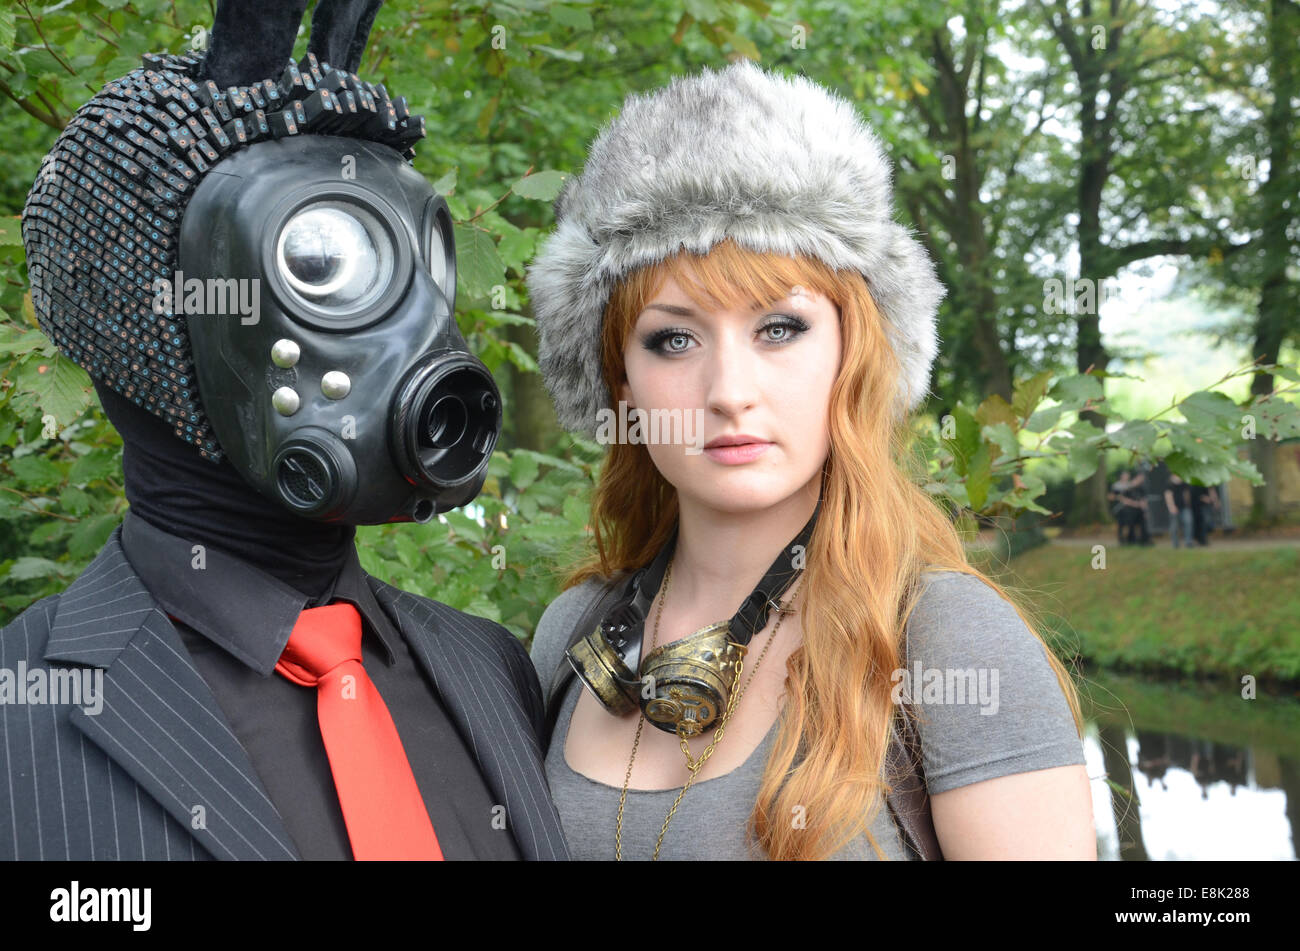 colorful young couple at 2014 Fantasy Fair Arcen Netherlands Stock Photo